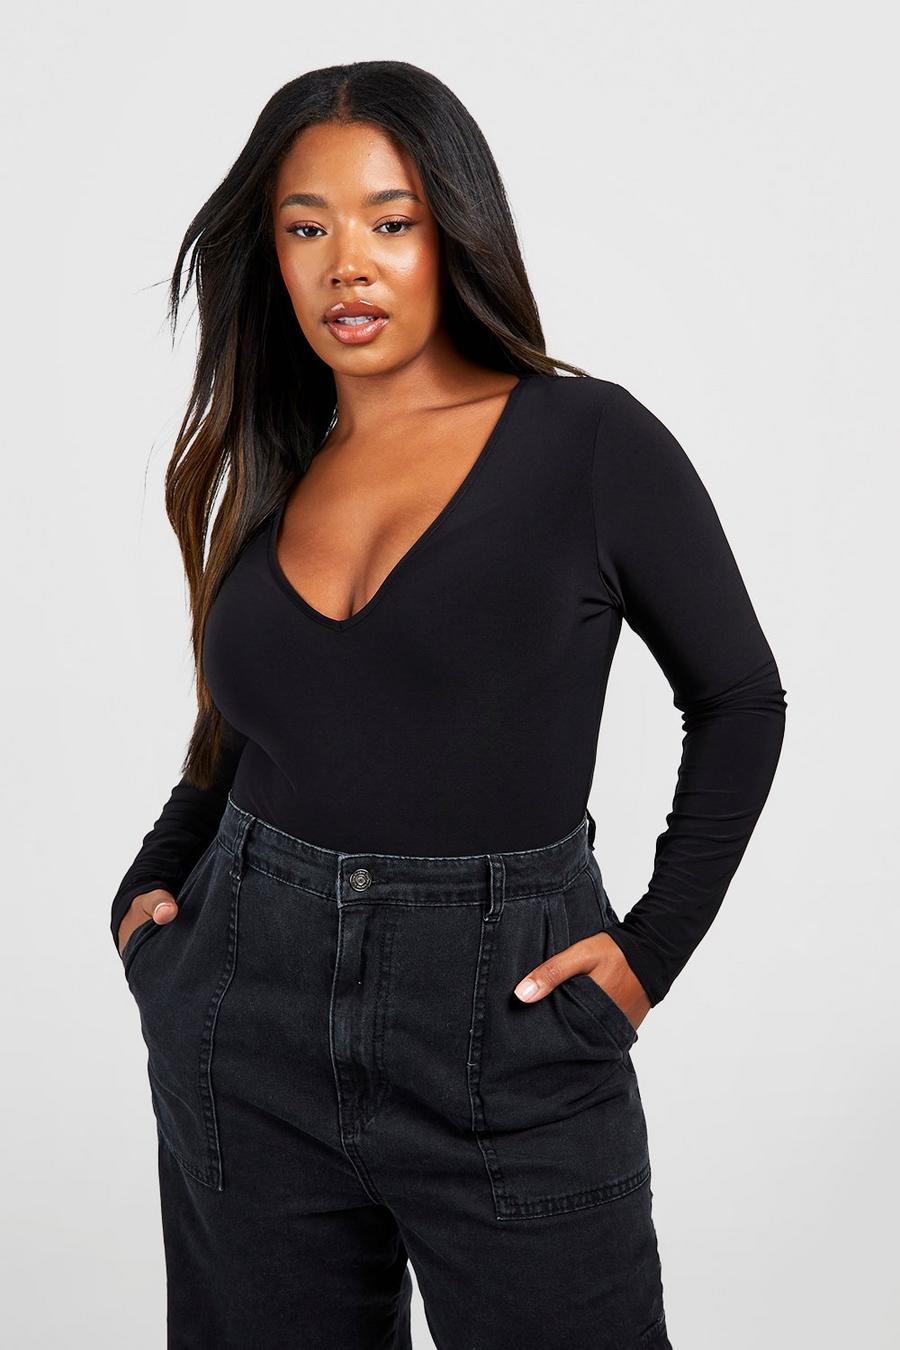 Women lose it over ridiculously high-cut 'front wedgie' bodysuit from Boohoo .com